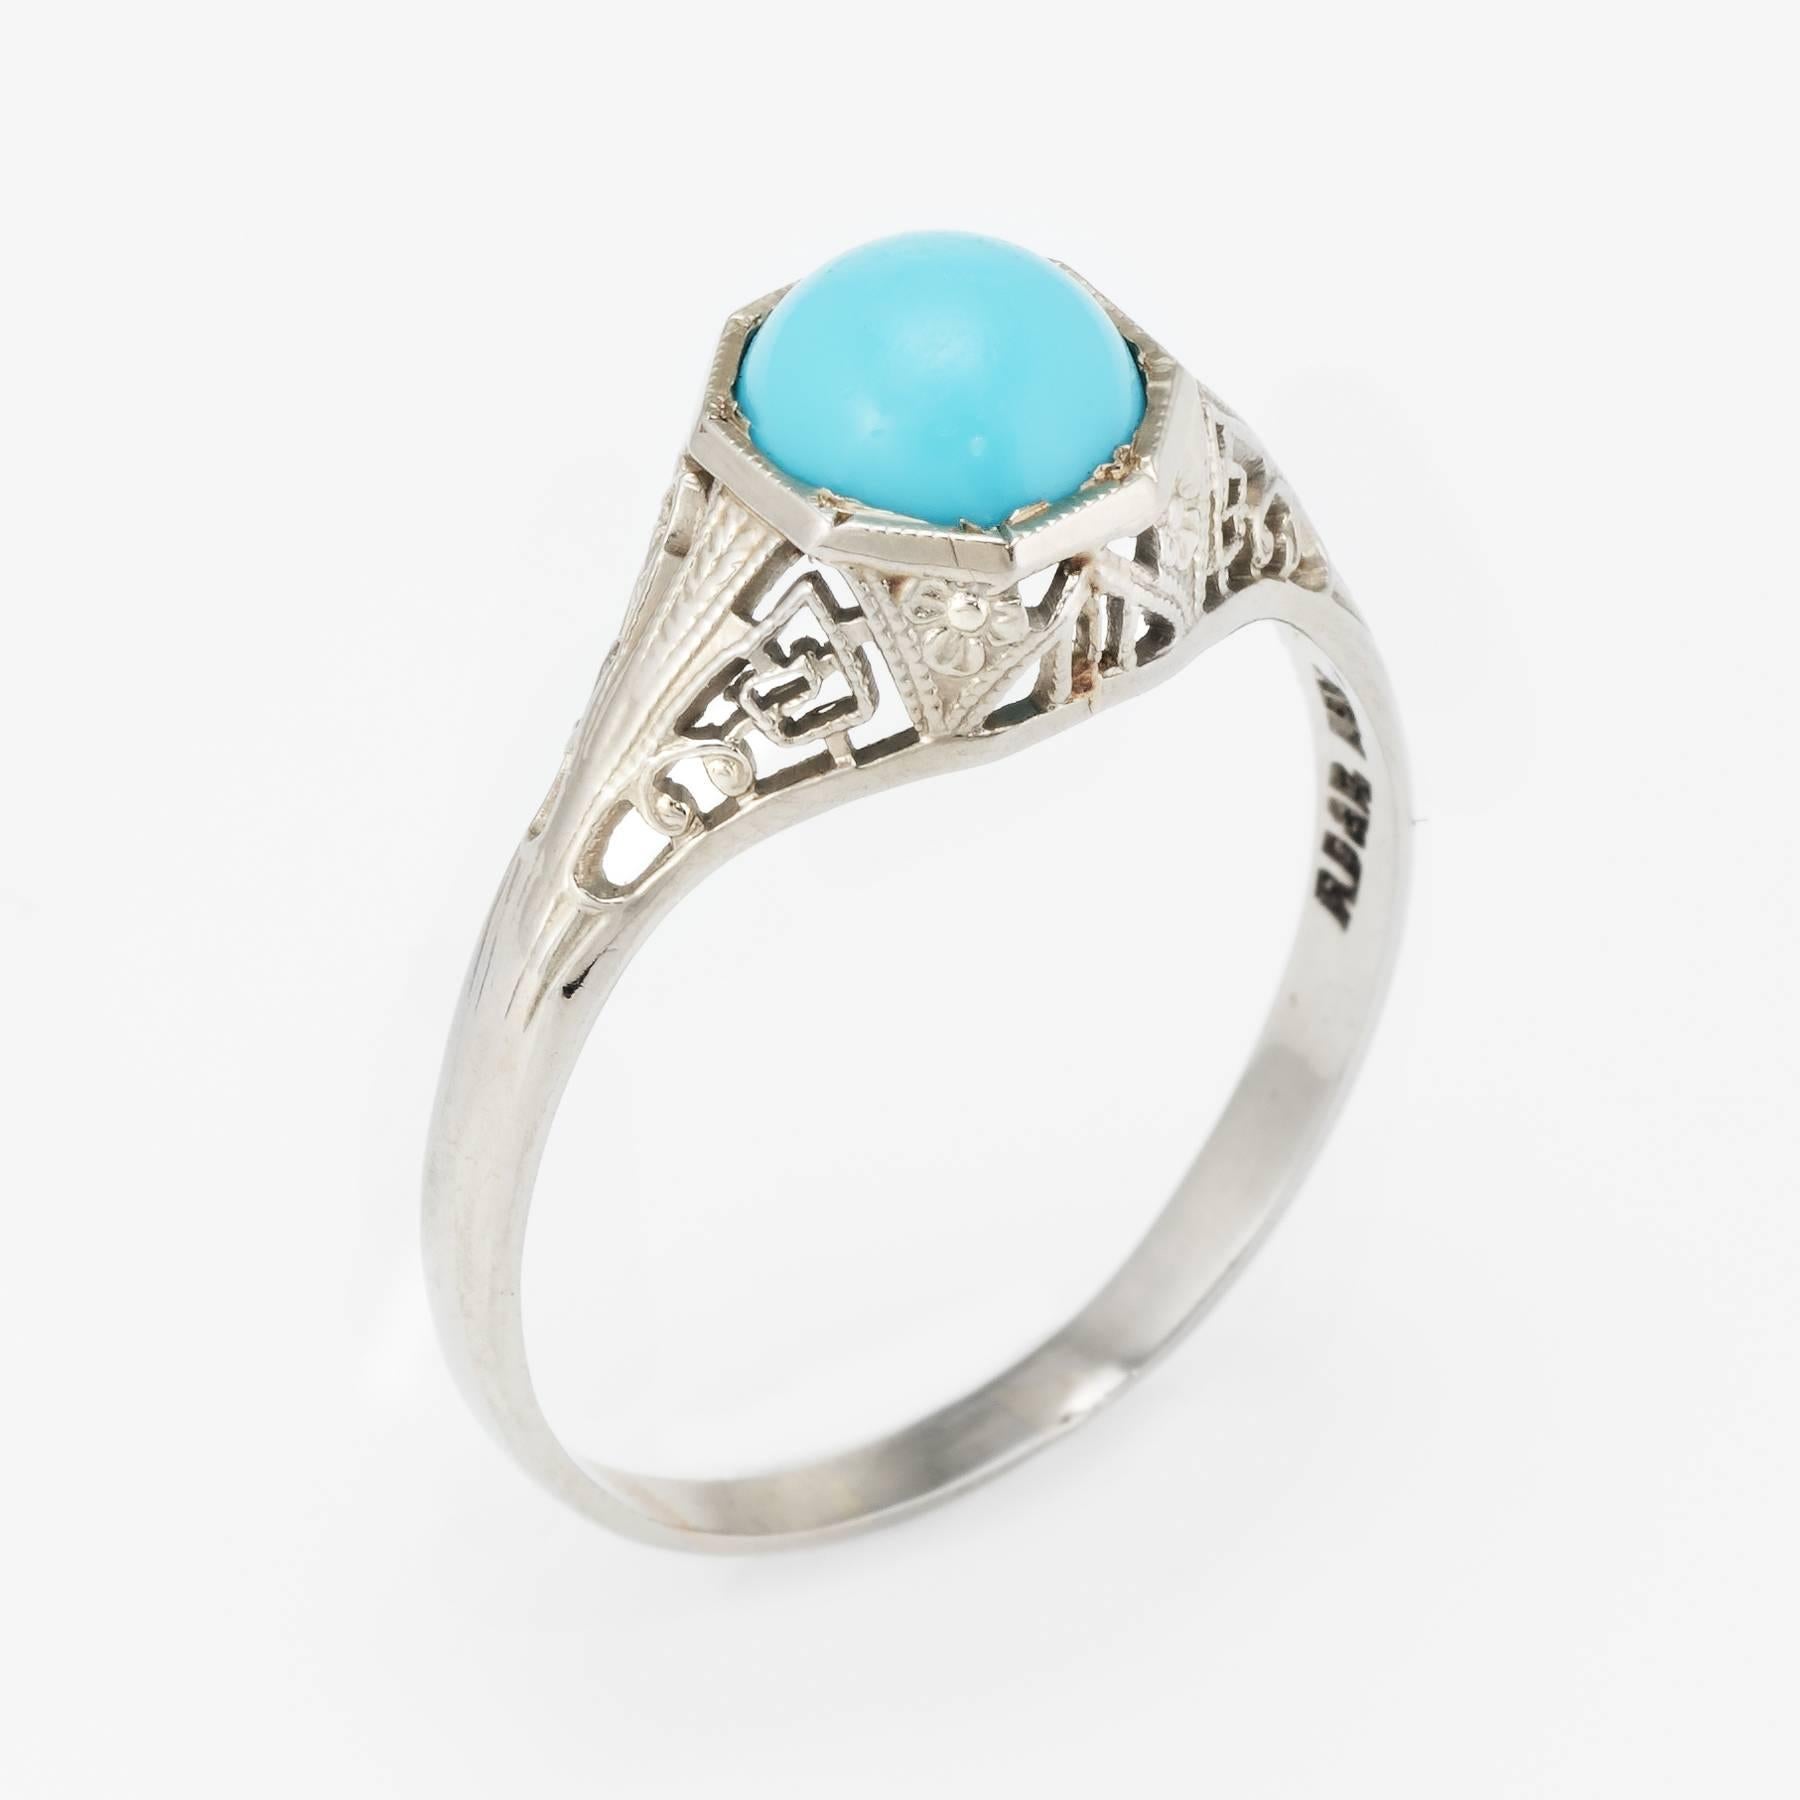 Finely detailed vintage Art Deco era ring (circa 1920s to 1930s), crafted in 14 karat white gold. 

Cabochon cut turquoise measures 6.6mm (estimated at 1.50). The turquoise is in excellent condition and free of cracks or chips.   

Lacy filigree